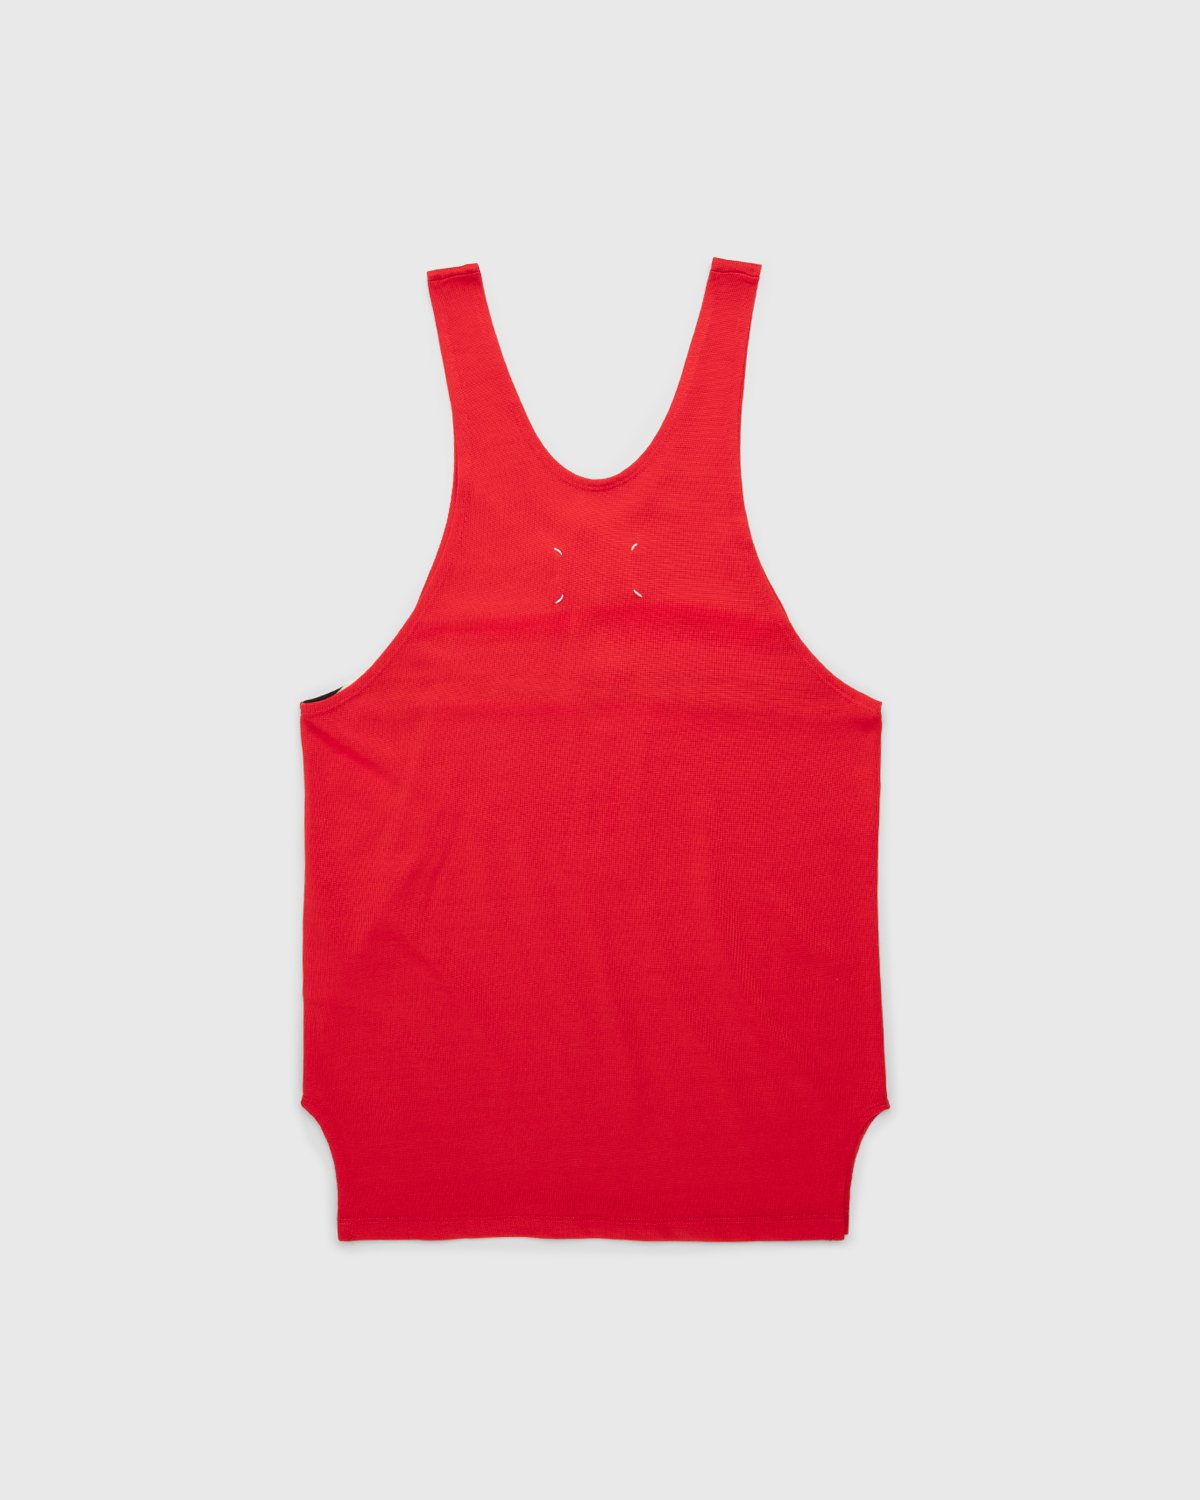 Maison Margiela - Tank Top Red - Clothing - Red - Image 2